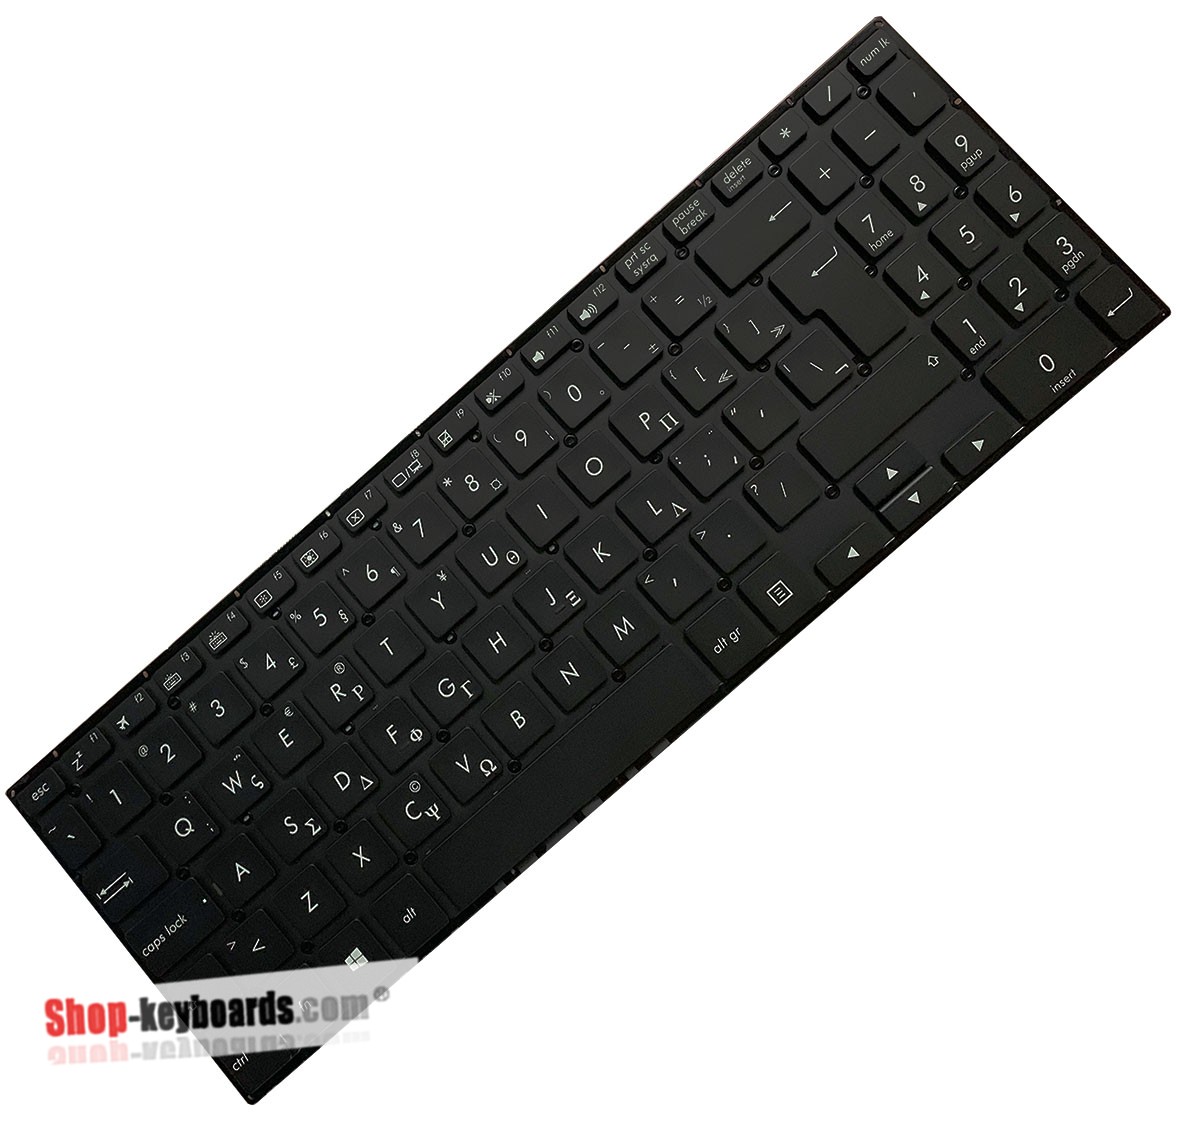 Asus 0KNB0-5630FR00 Keyboard replacement